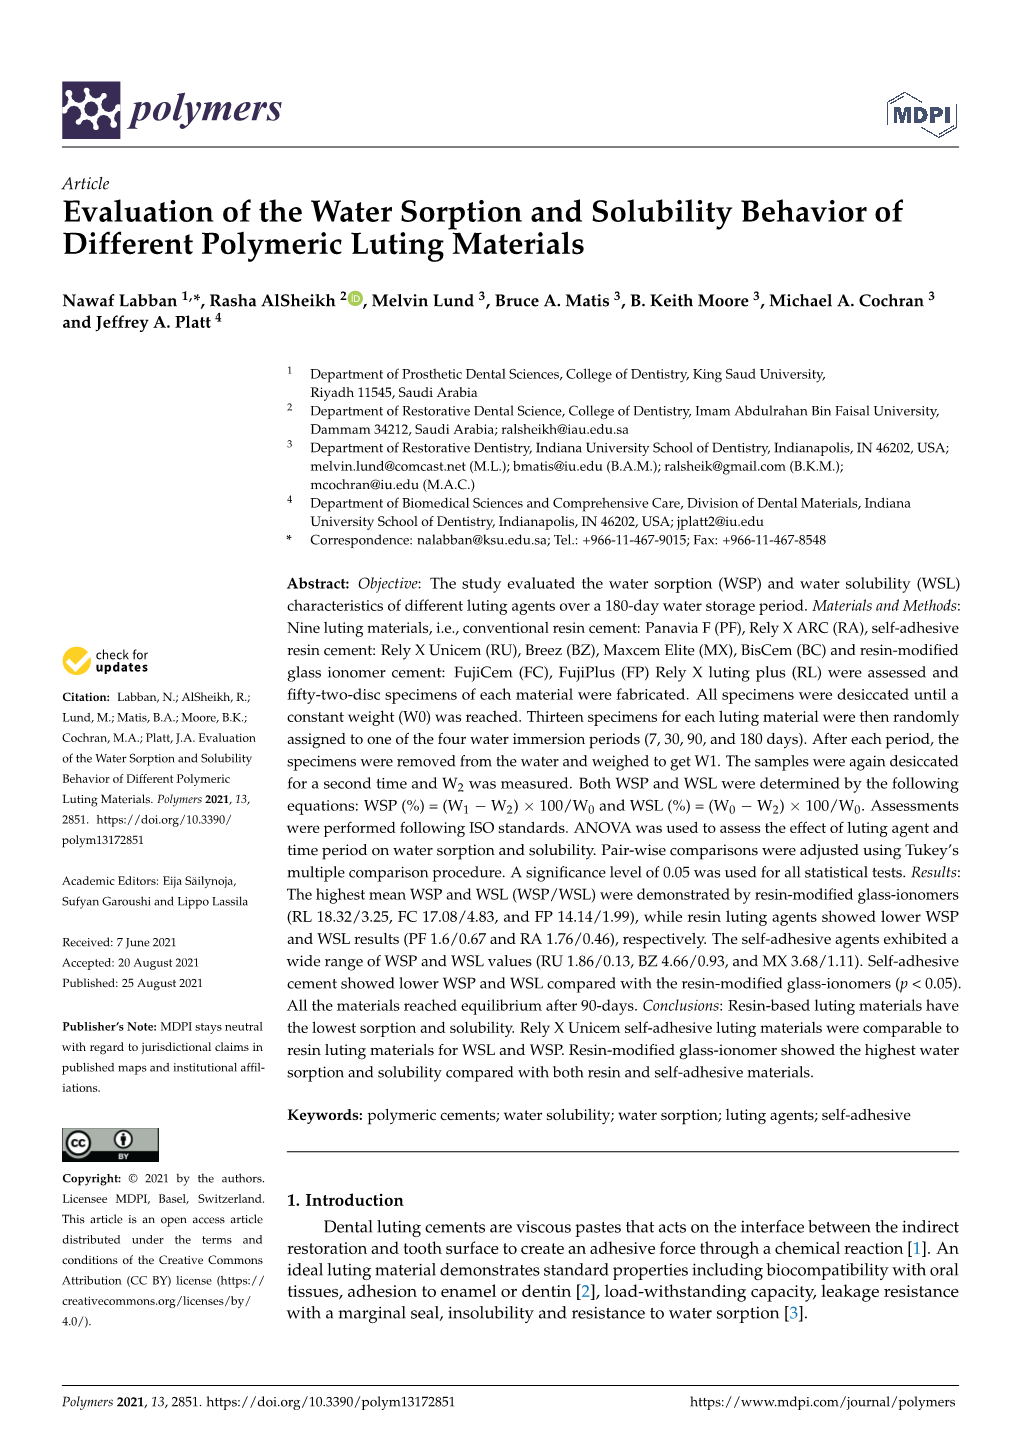 Evaluation of the Water Sorption and Solubility Behavior of Different Polymeric Luting Materials